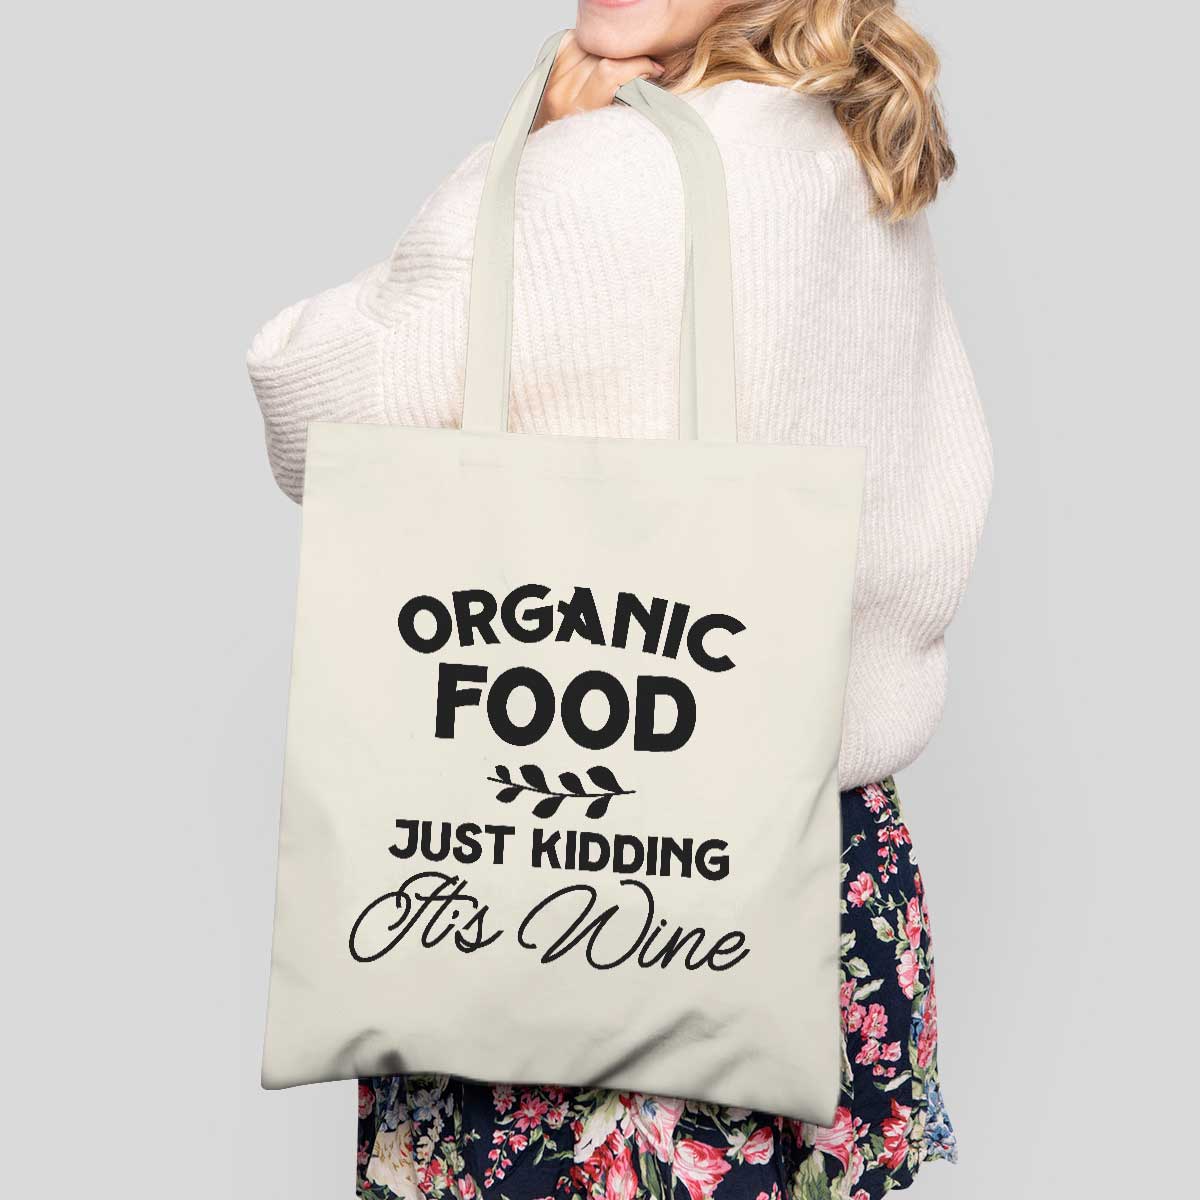 Organic Food Just Kidding it's Wine Tote Bag, Funny Tote Bag Wine Lover Gift